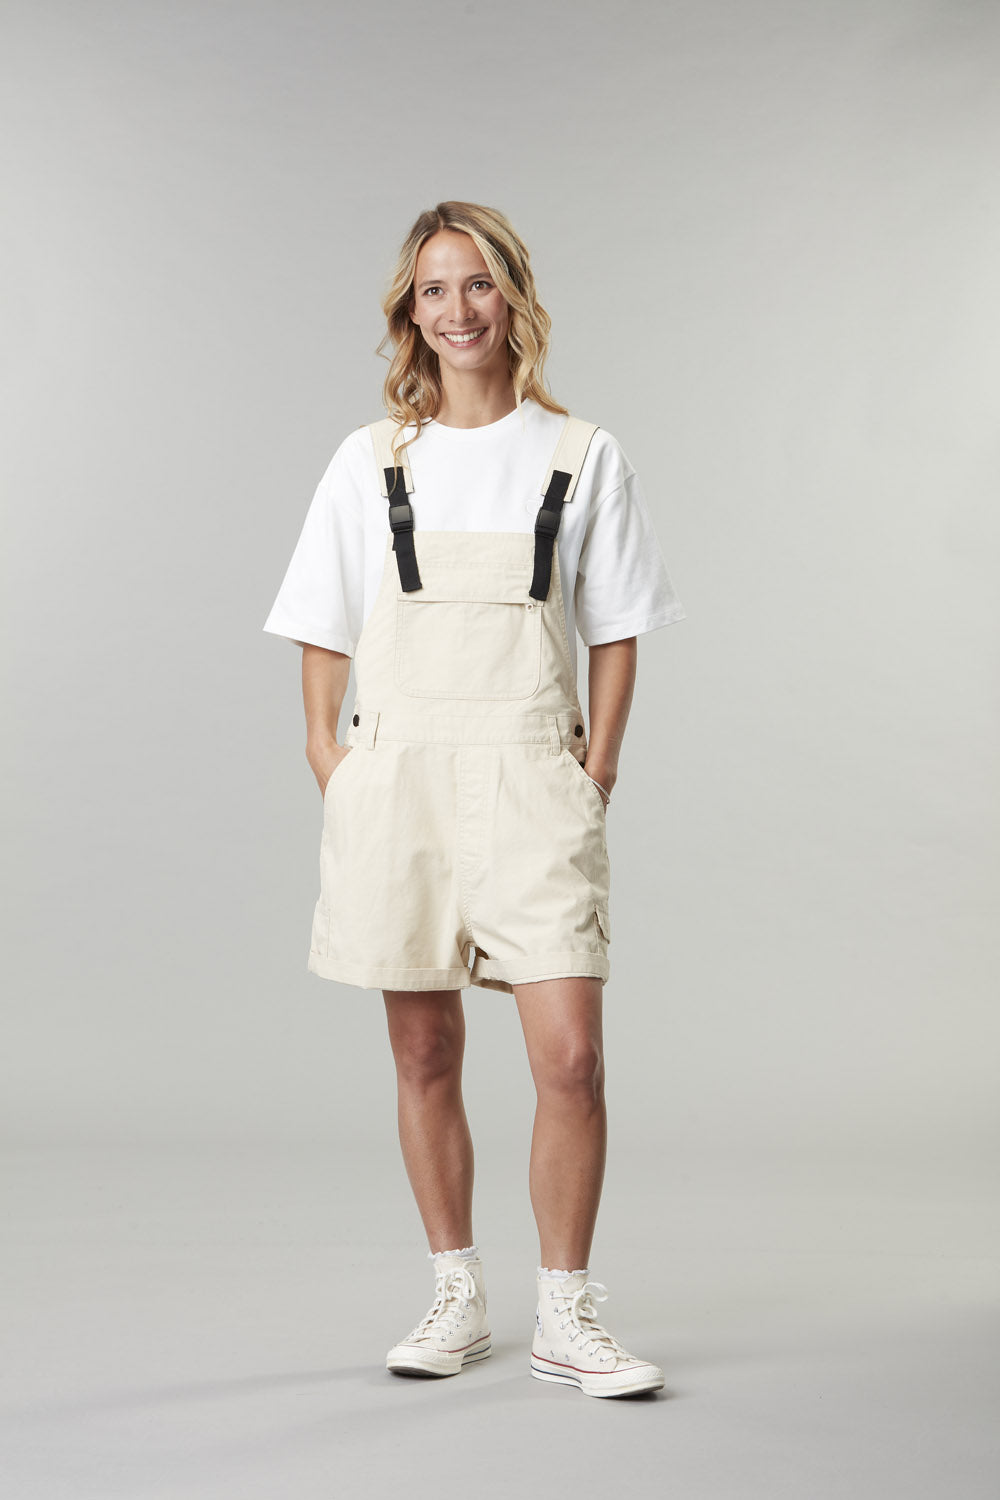 Picture Organic - W's Baylee Overalls - 100% Organic Cotton - Weekendbee - sustainable sportswear